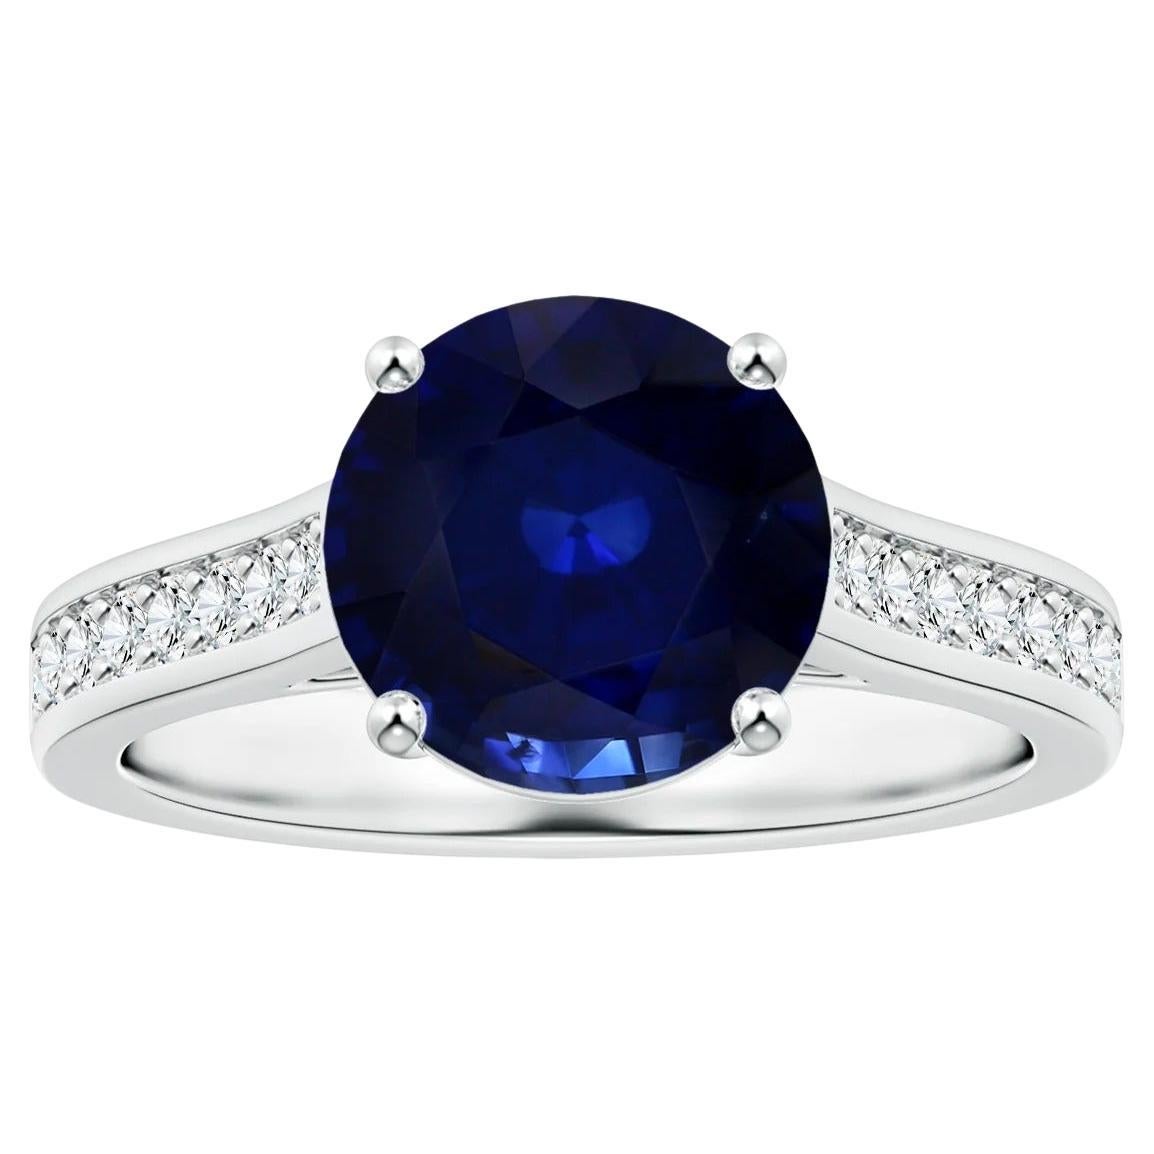 ANGARA GIA Certified Natural Blue Sapphire Ring in White Gold with Diamonds